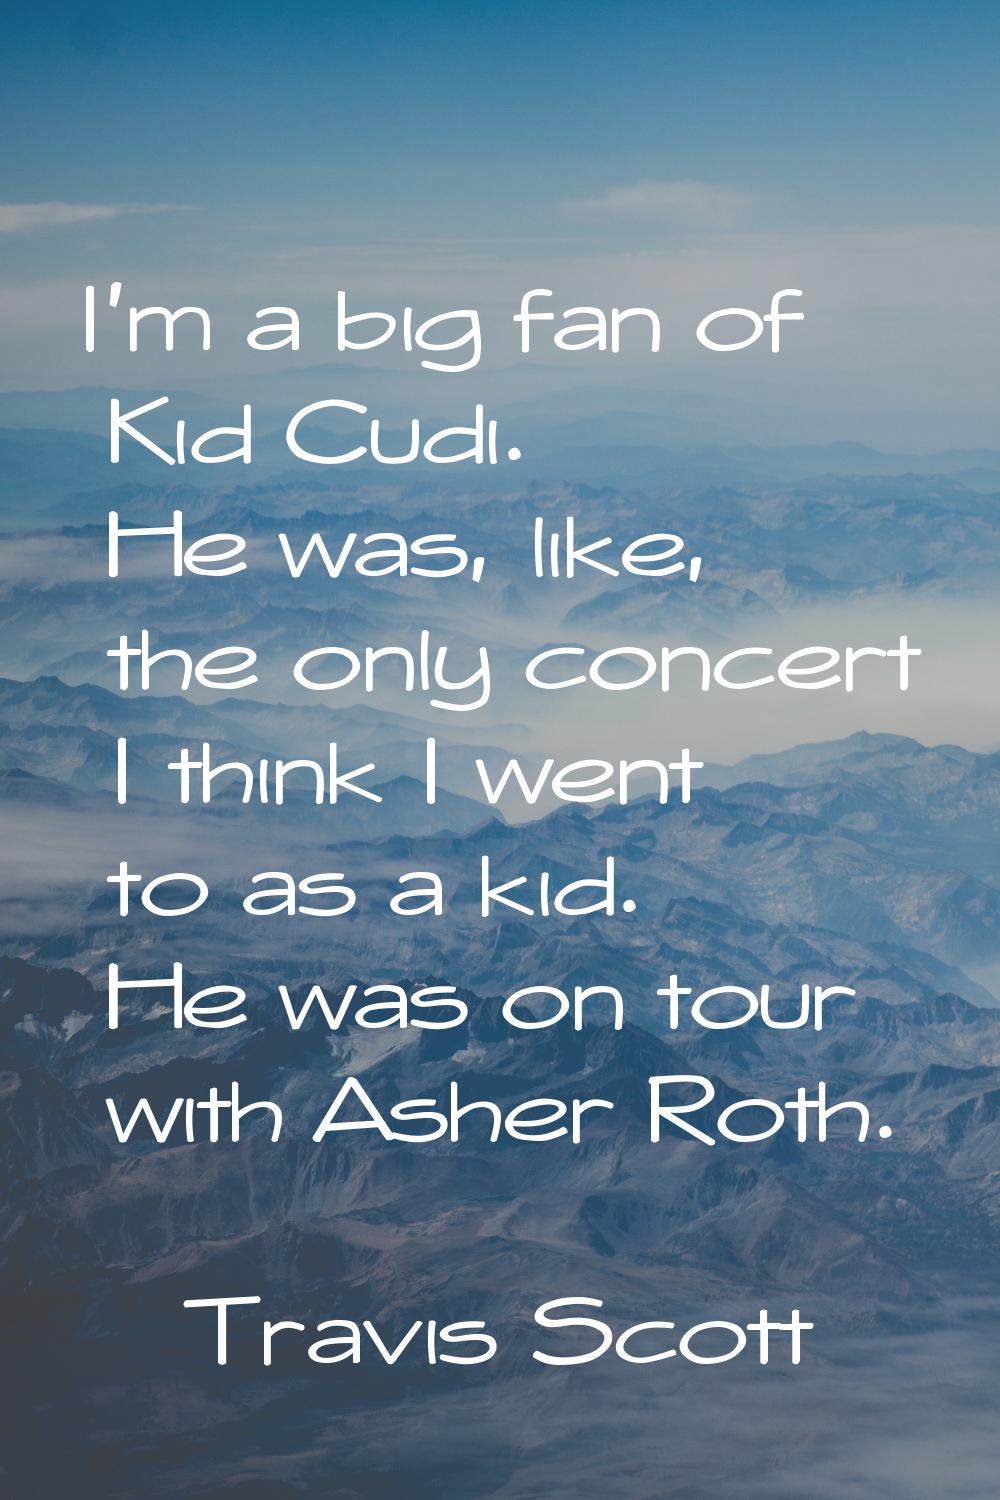 I'm a big fan of Kid Cudi. He was, like, the only concert I think I went to as a kid. He was on tou